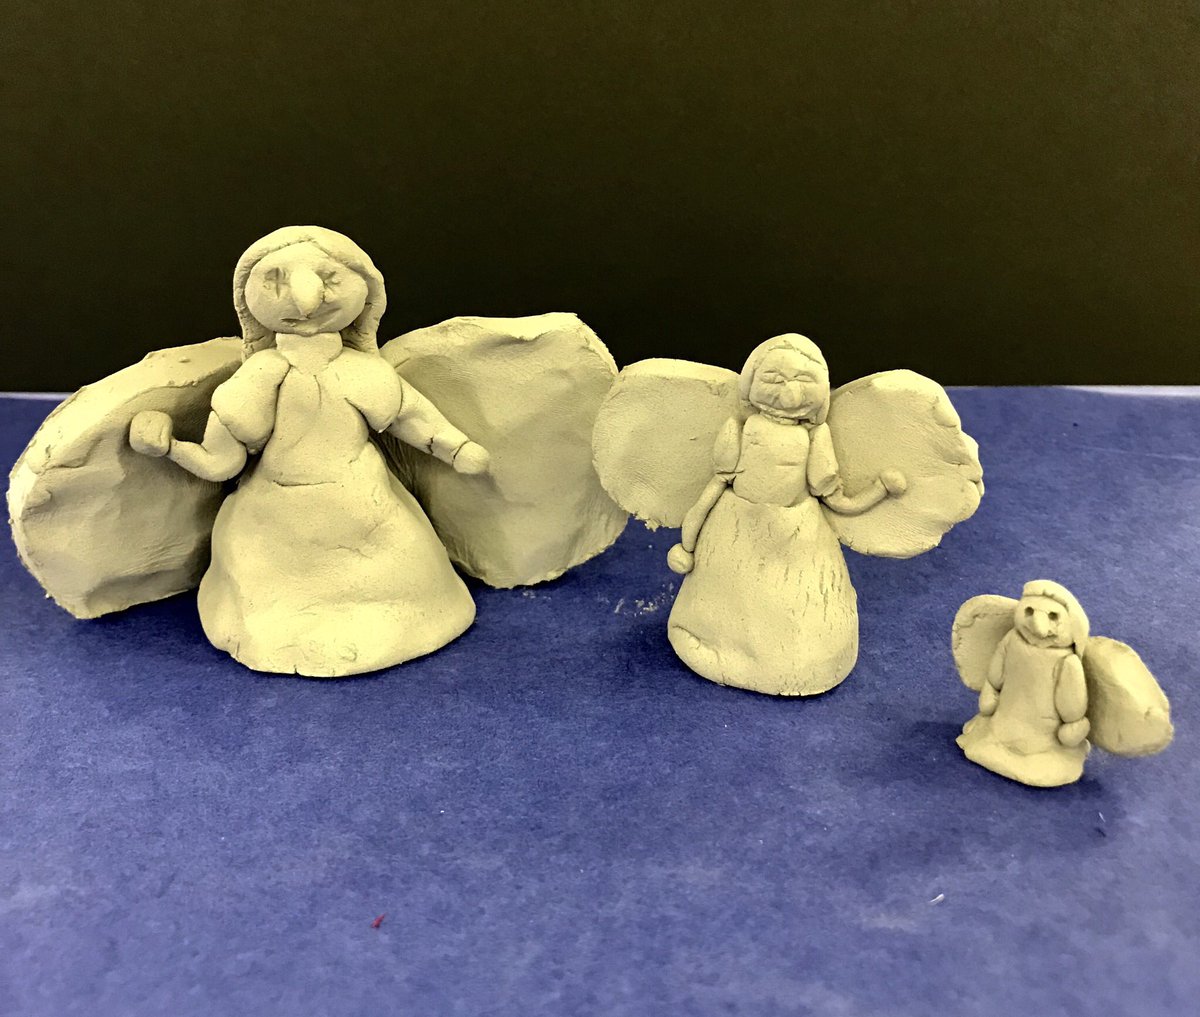 One of my fifth grade art students clay angels. ❤️ Seems appropriate for today. #teachersneverstopcaring